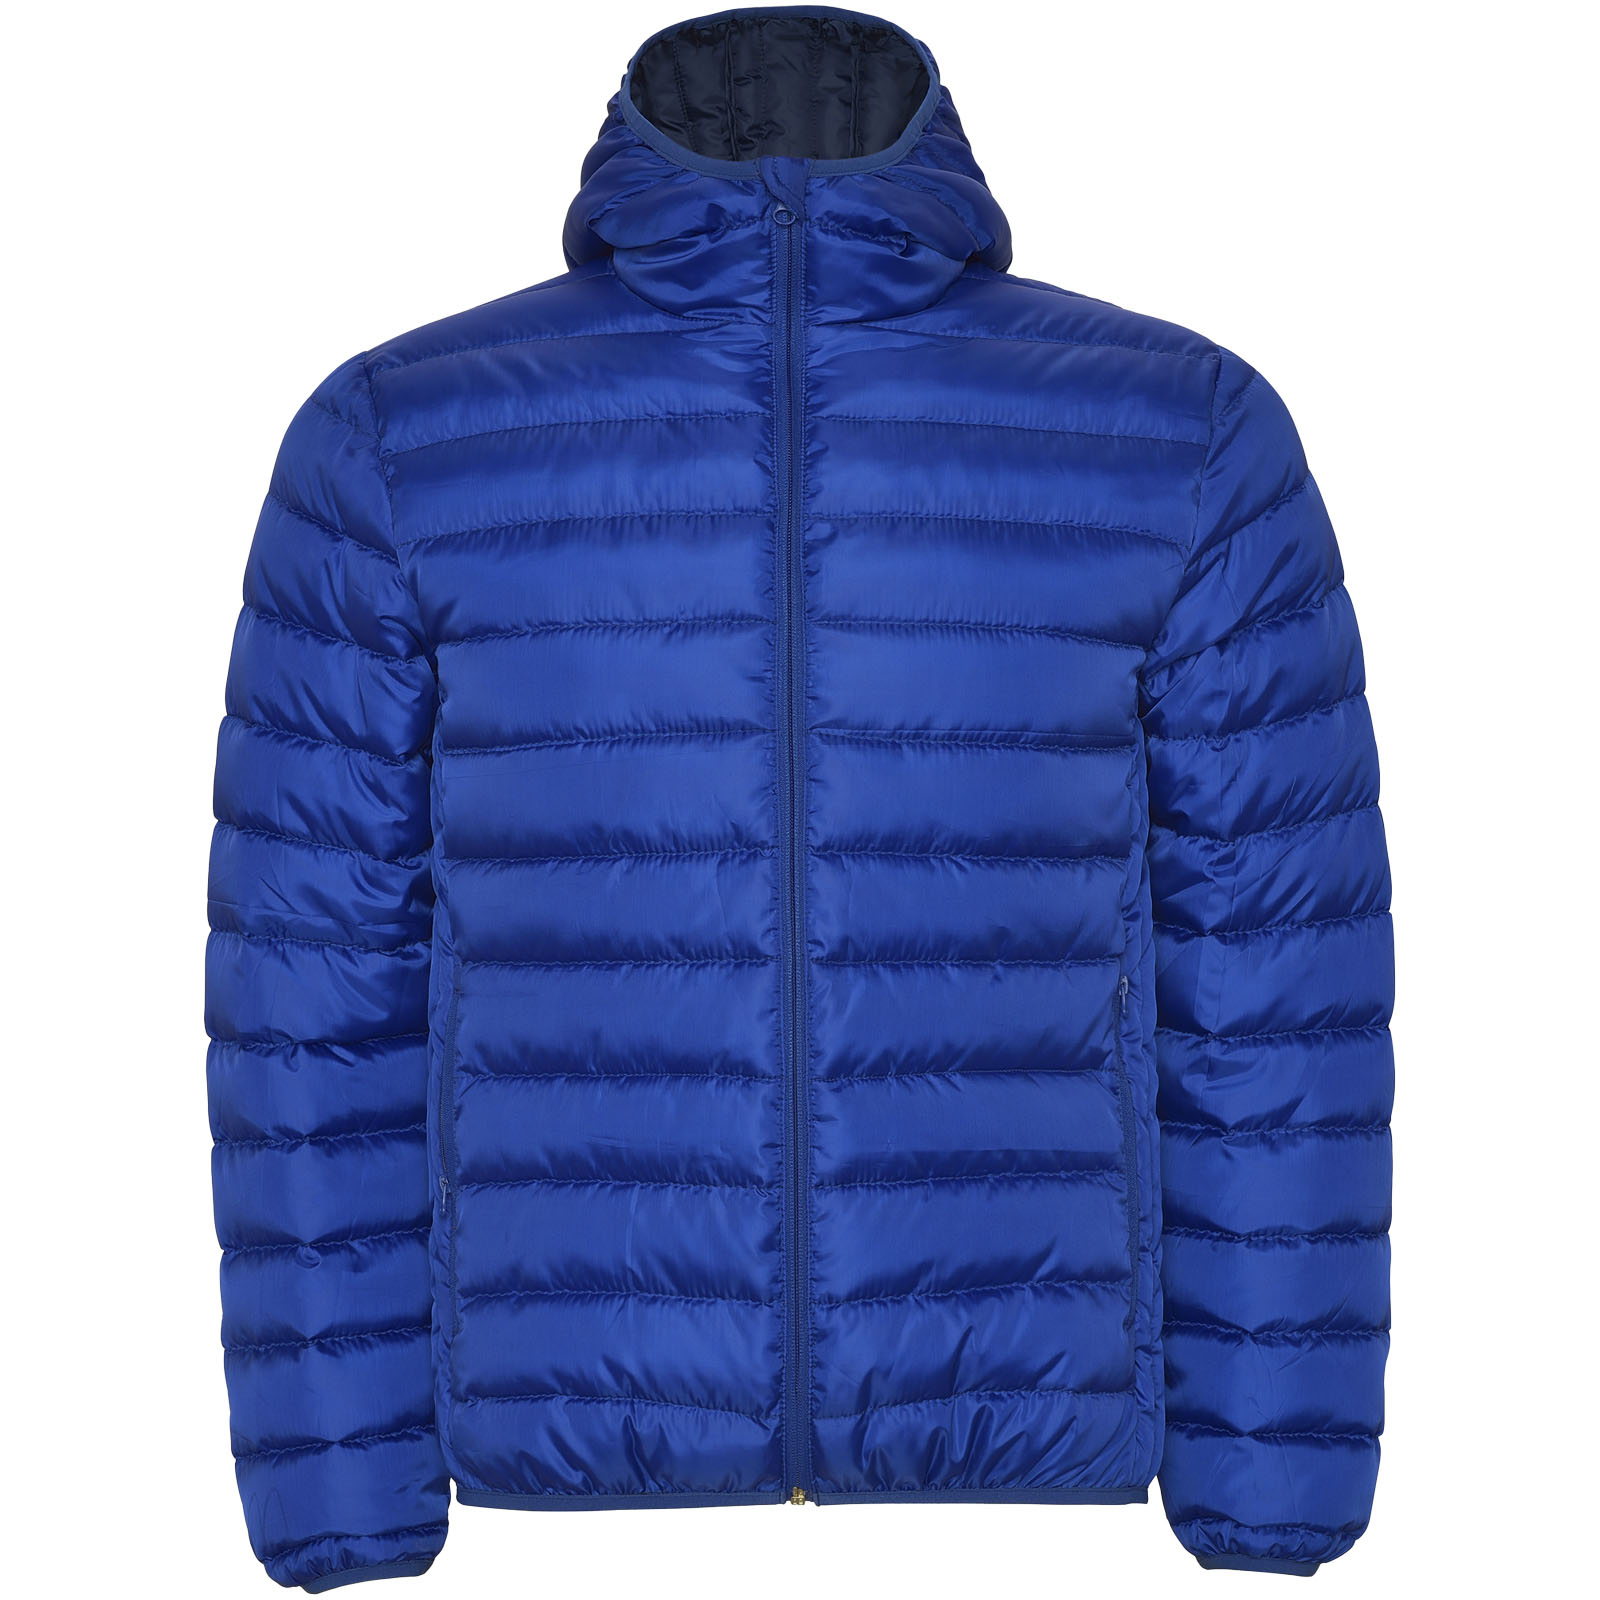 Clothing - Norway men's insulated jacket